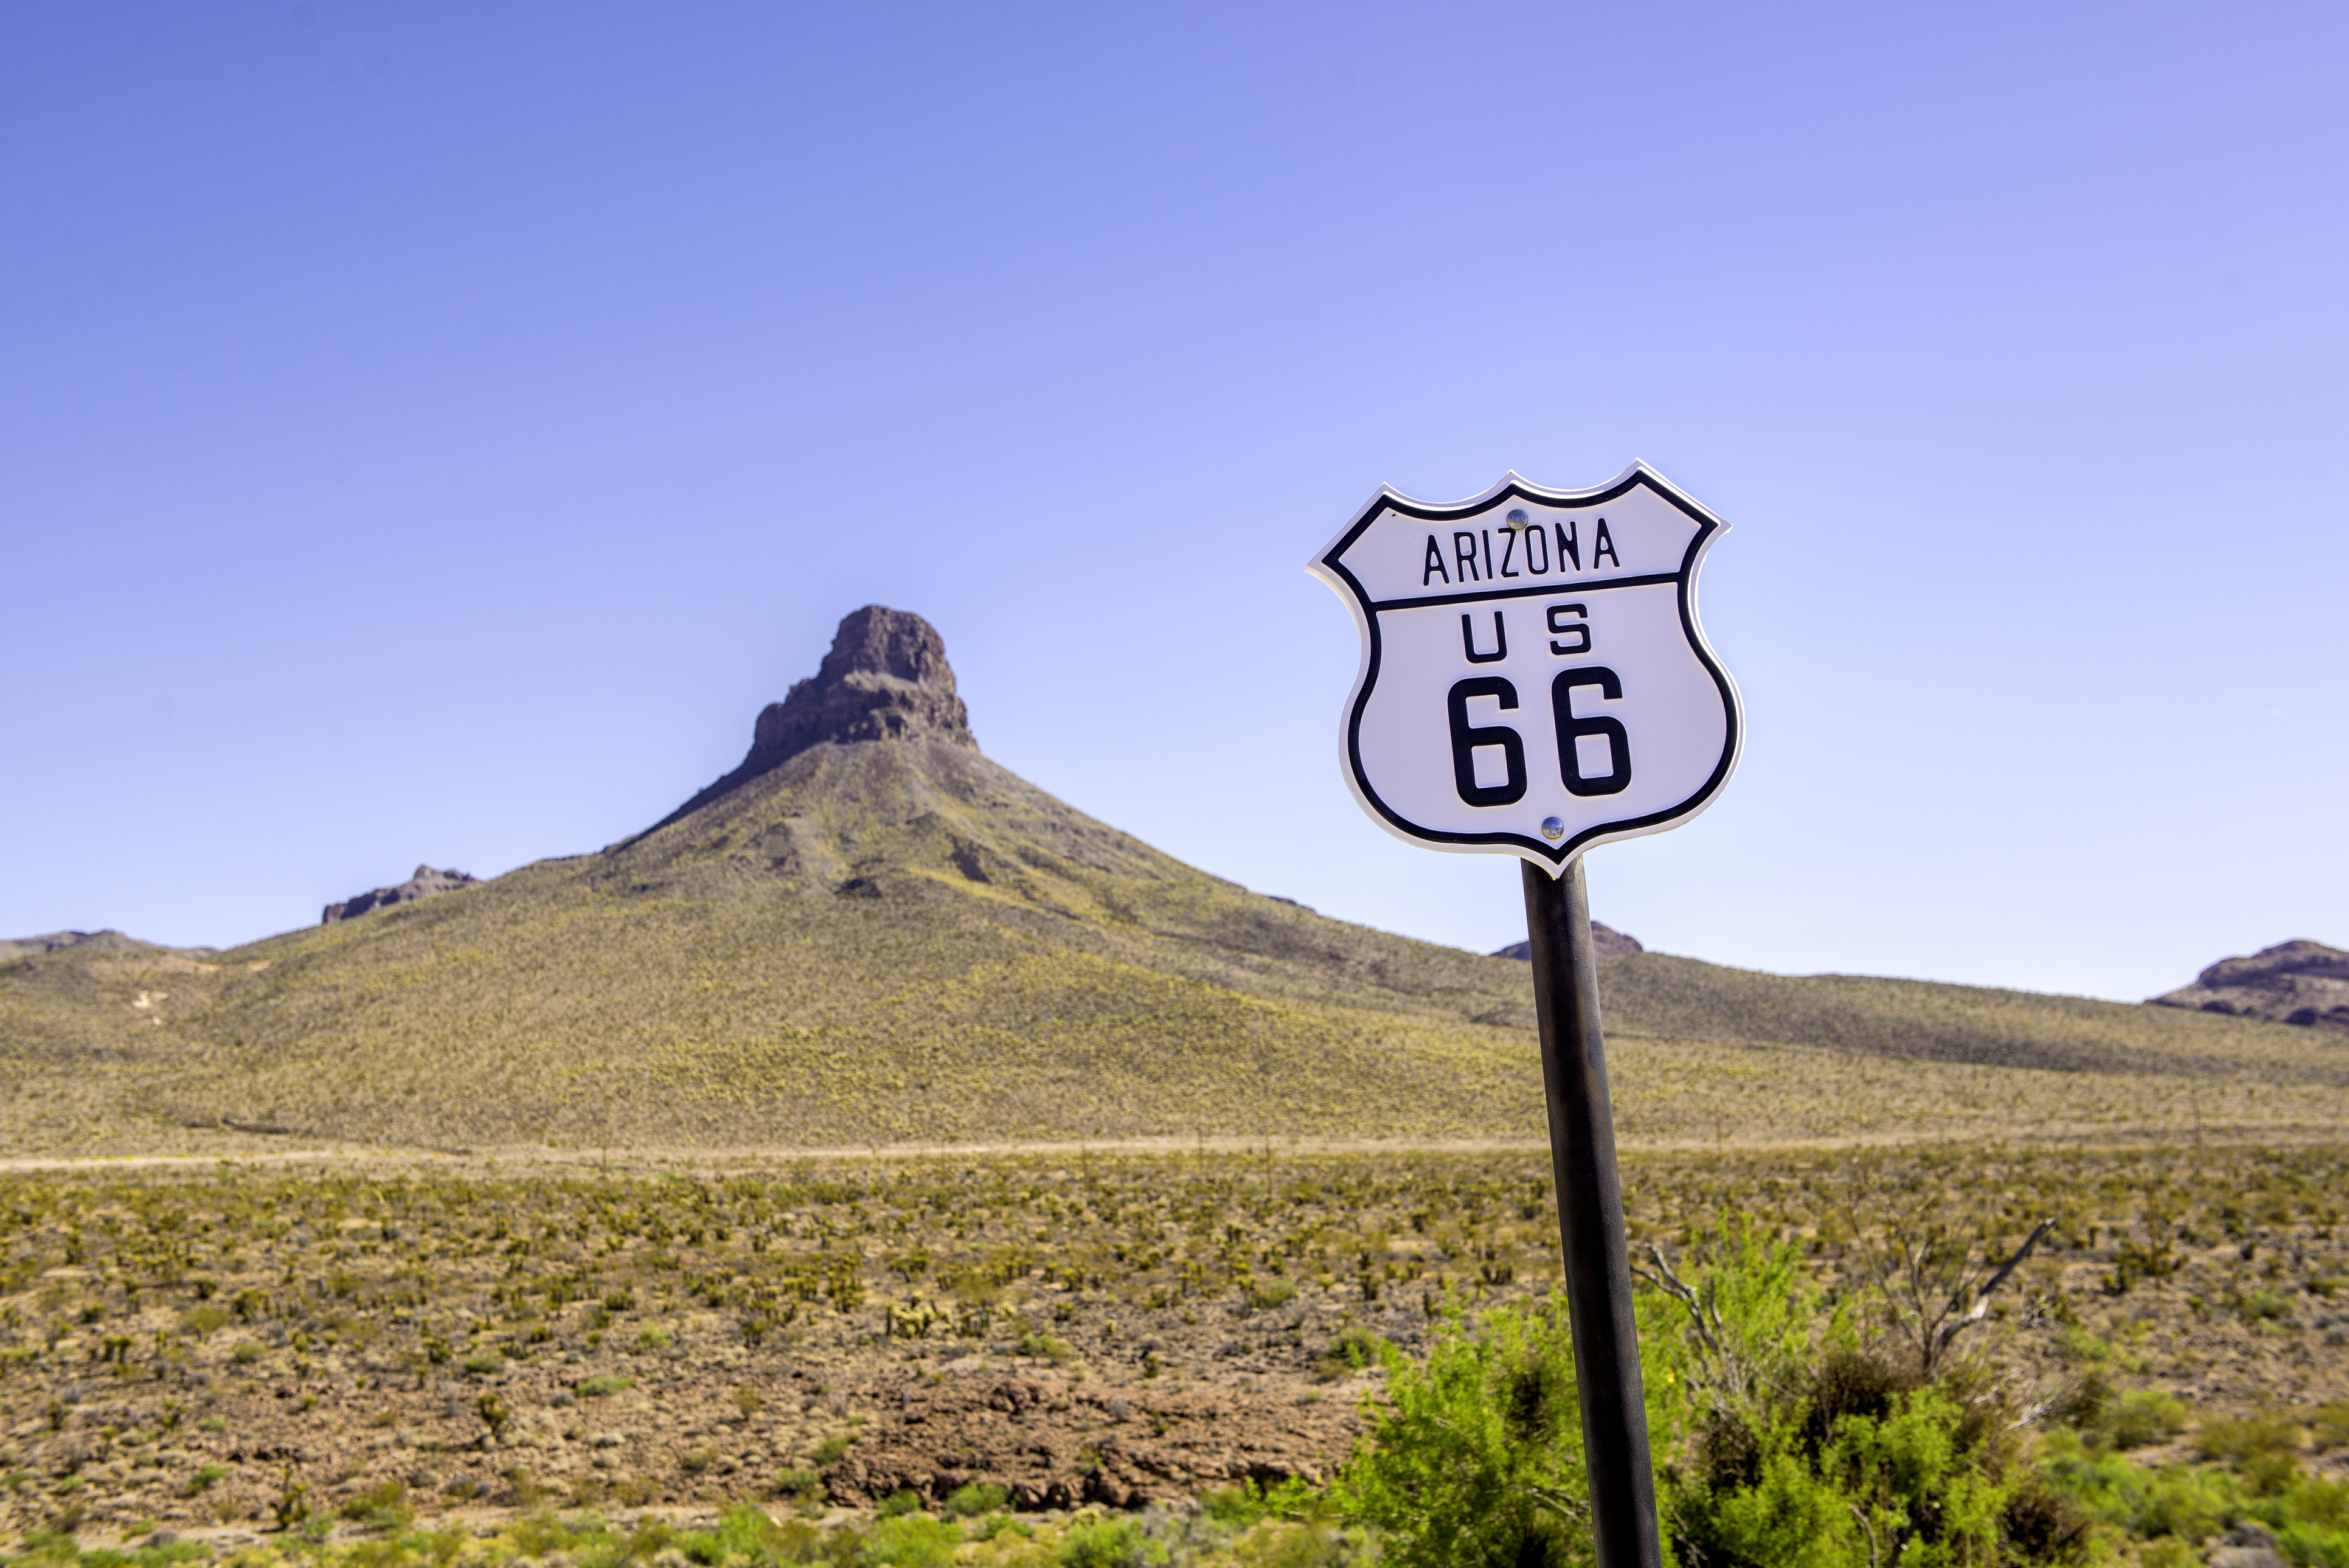 US Route 66 sign in Arizona